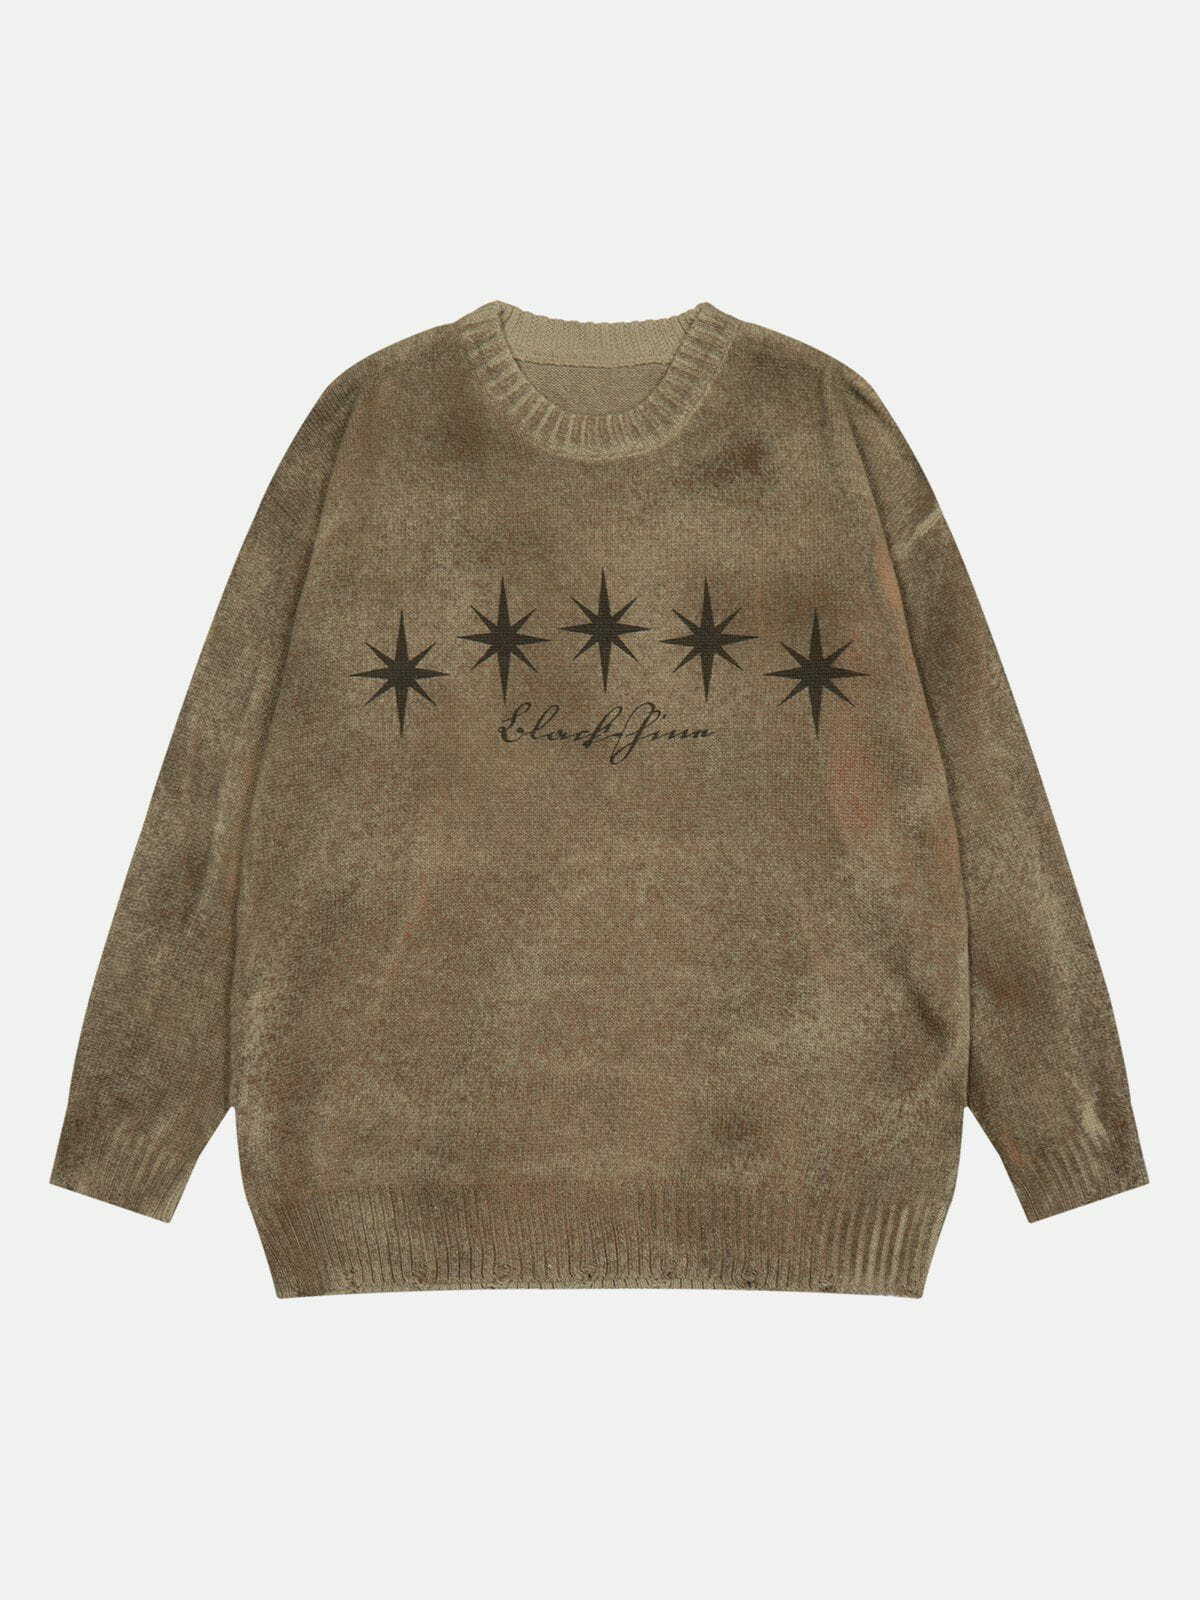 sepia star sweater vintage chic & edgy vibe 8004